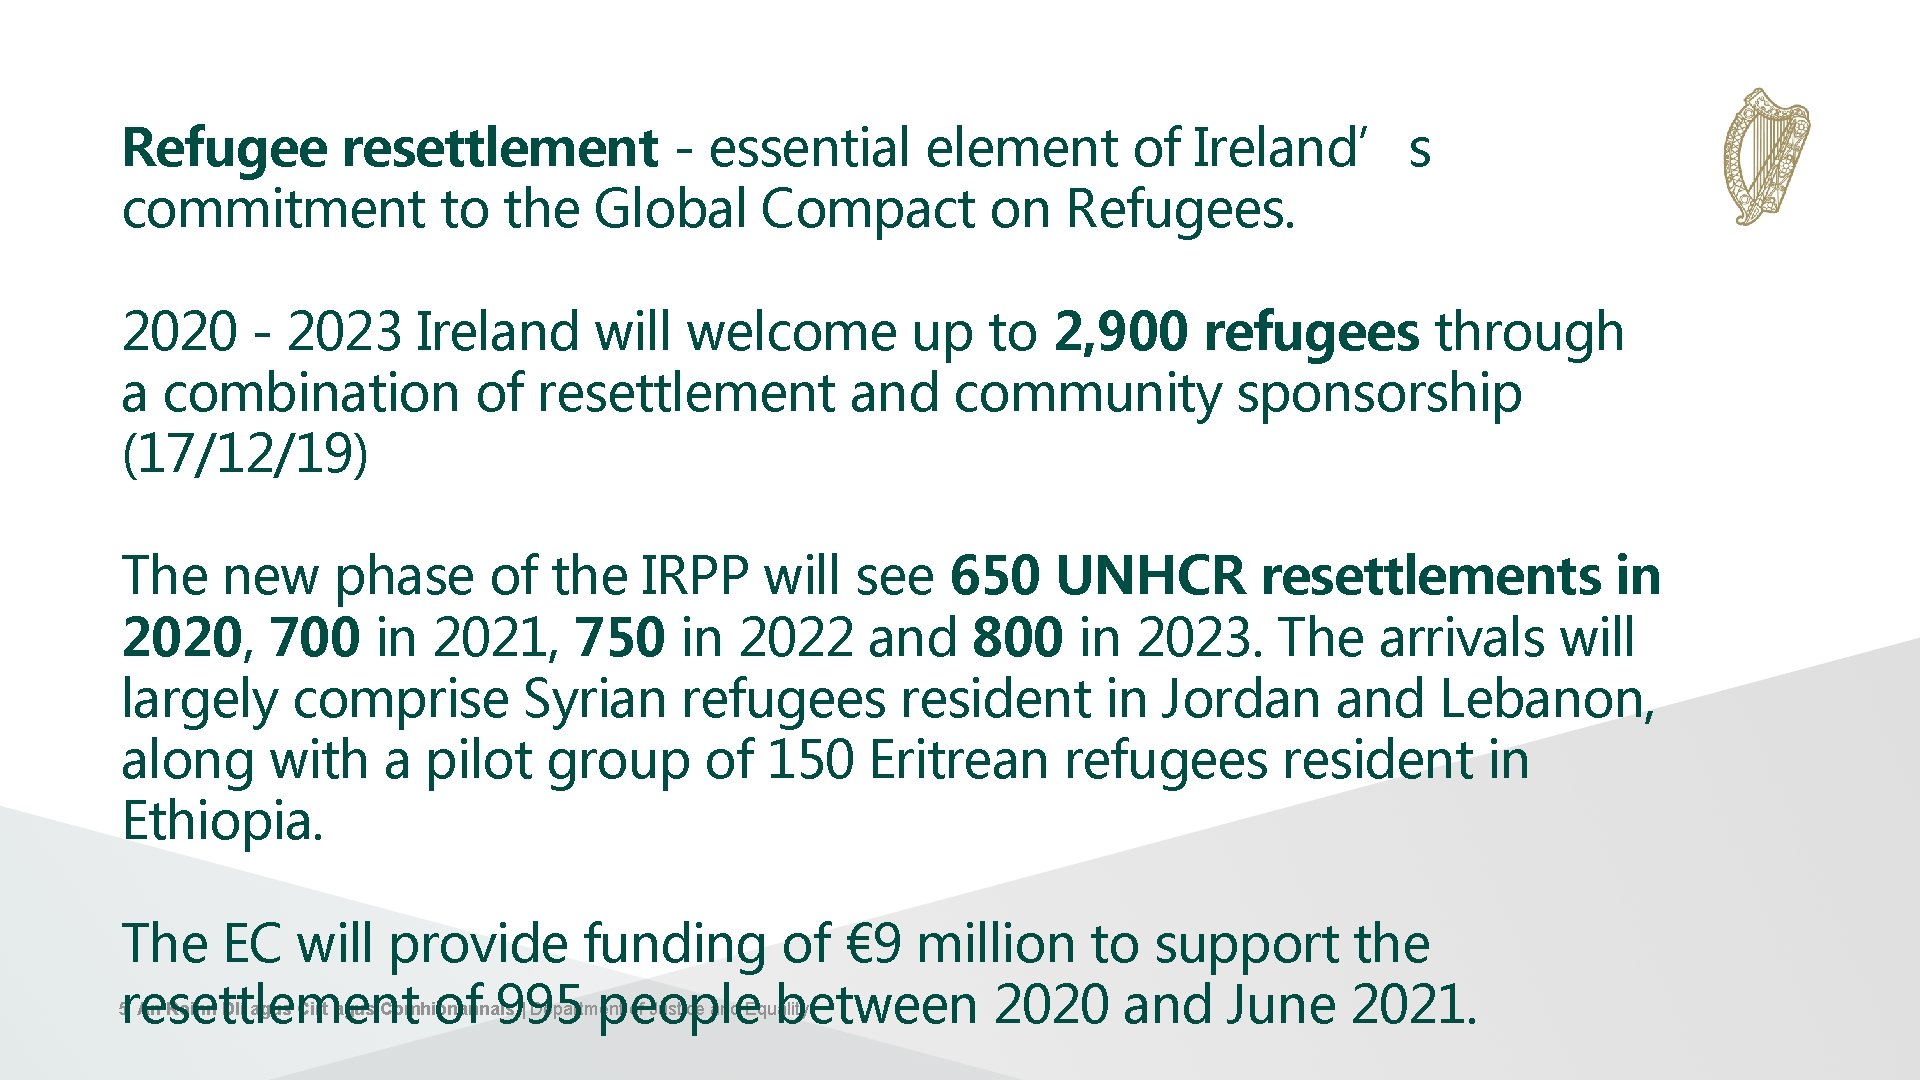 Refugee resettlement - essential element of Ireland’s commitment to the Global Compact on Refugees.